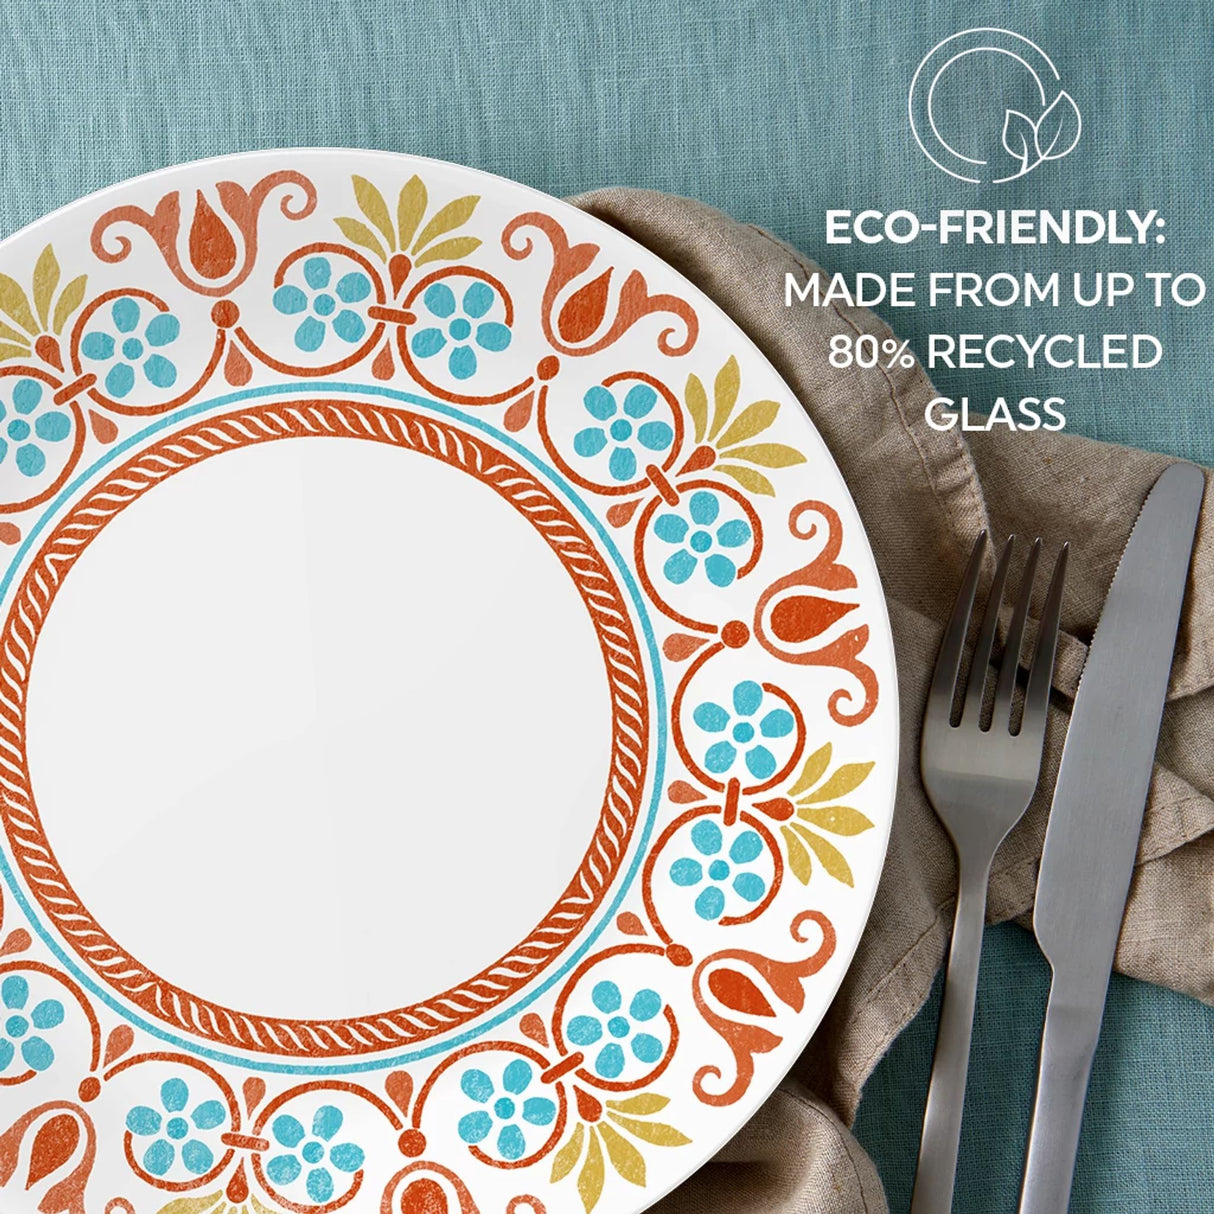  Terracotta Dreams dinnerplate with text text that says eco-friendly made from up to 80% recycled glass